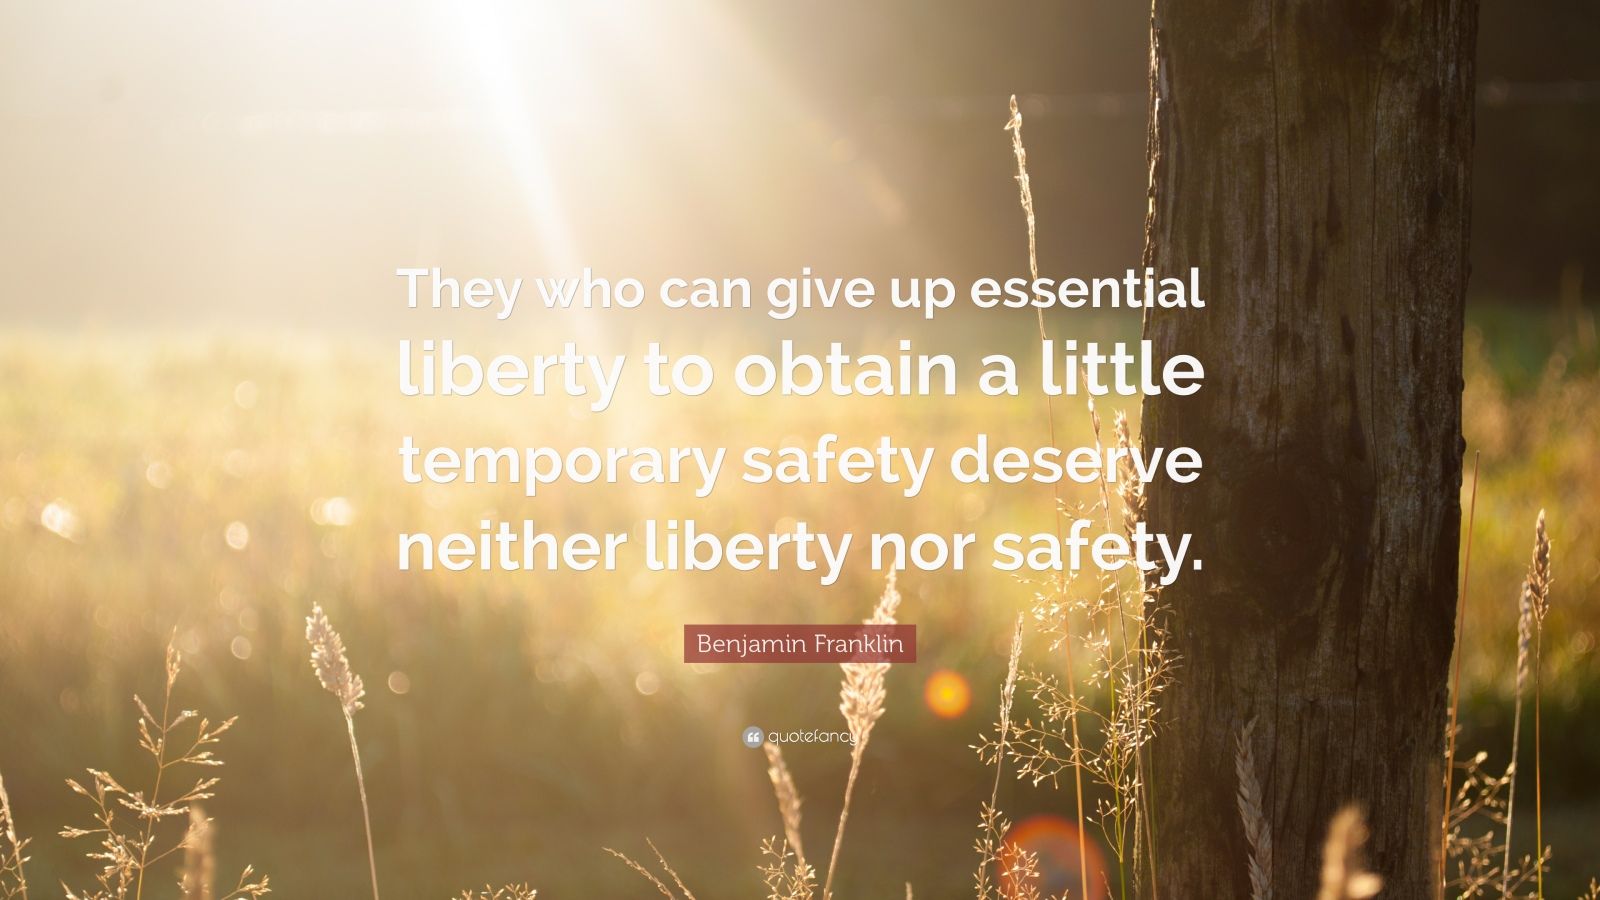 Benjamin Franklin Quote: “They who can give up essential liberty to